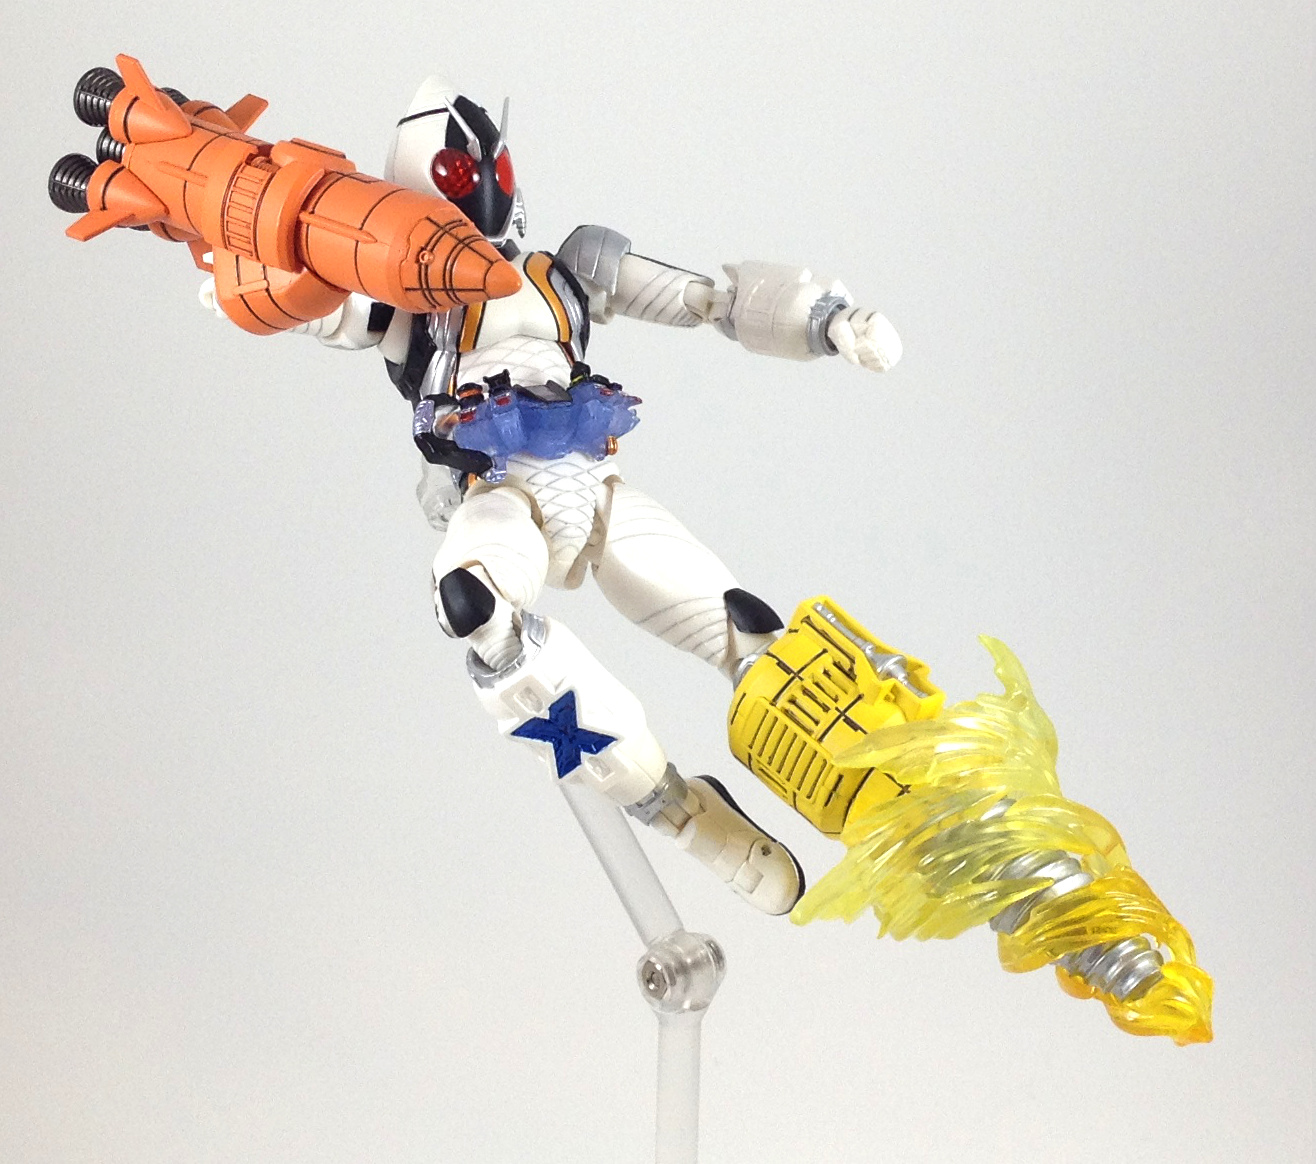 Kamen Rider Fourze: Stand and Effects Set (S.H. Figuarts)